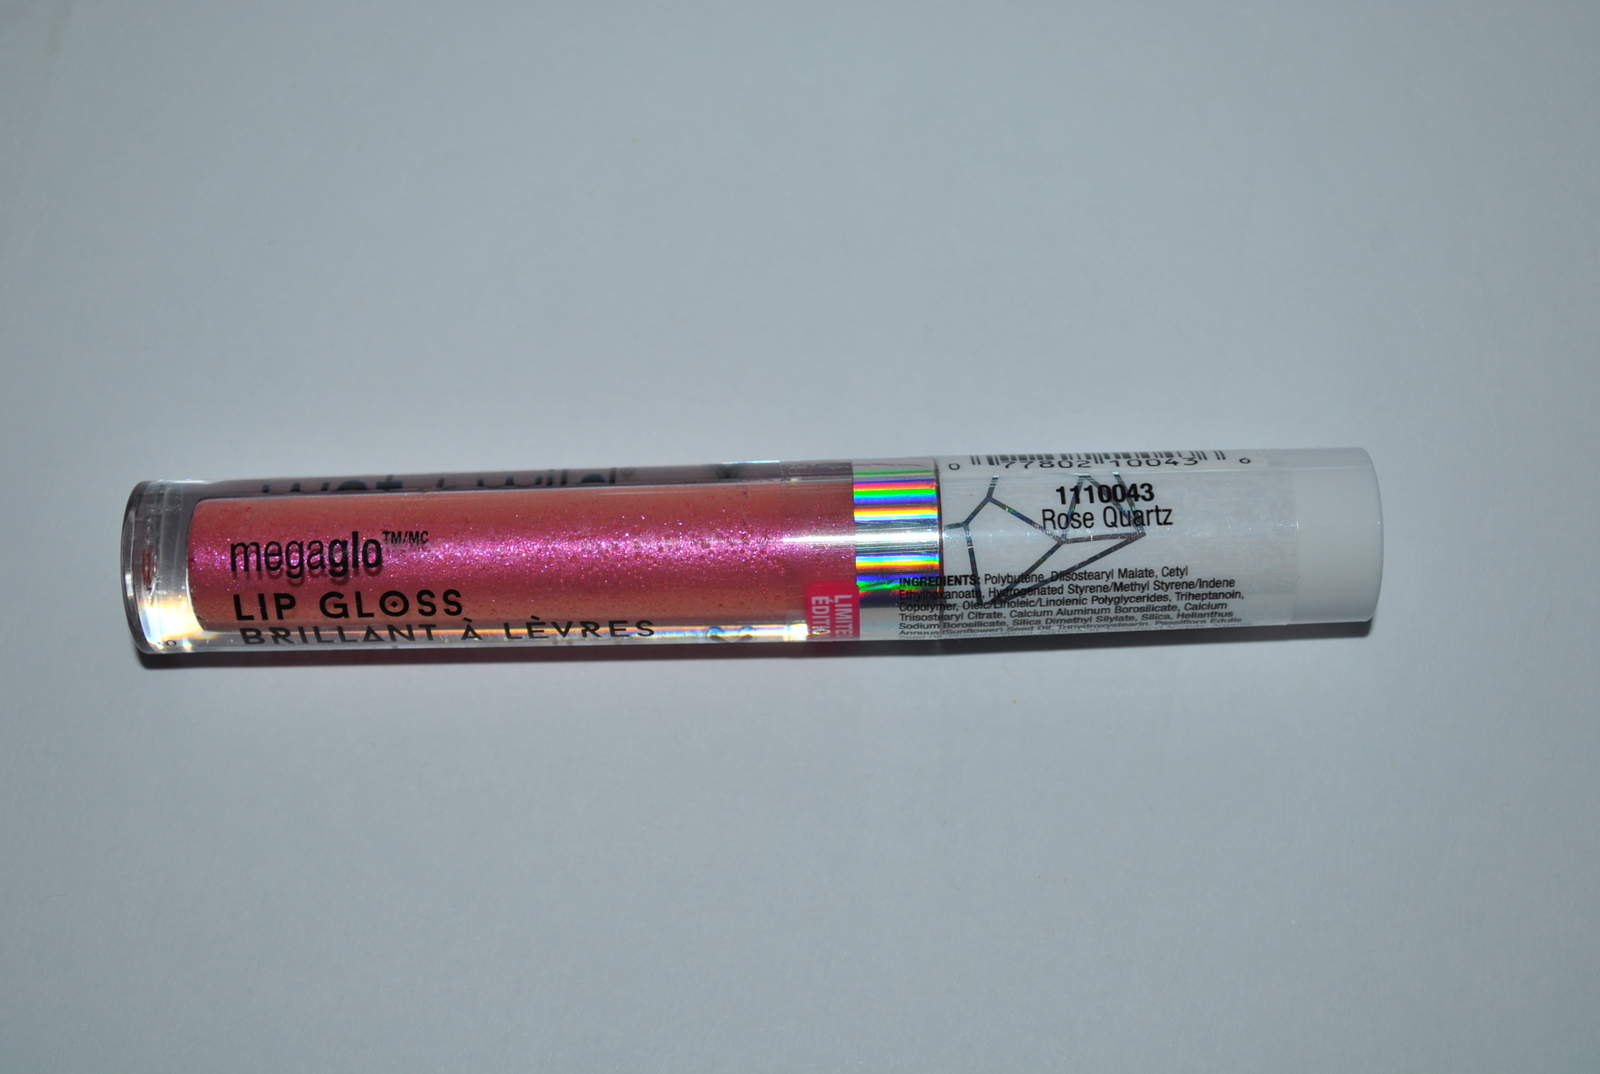 Primary image for Wet n Wild Crystal Cavern MegaGlo Lip Gloss - 1110043 Rose Quartz (Pack of 1)